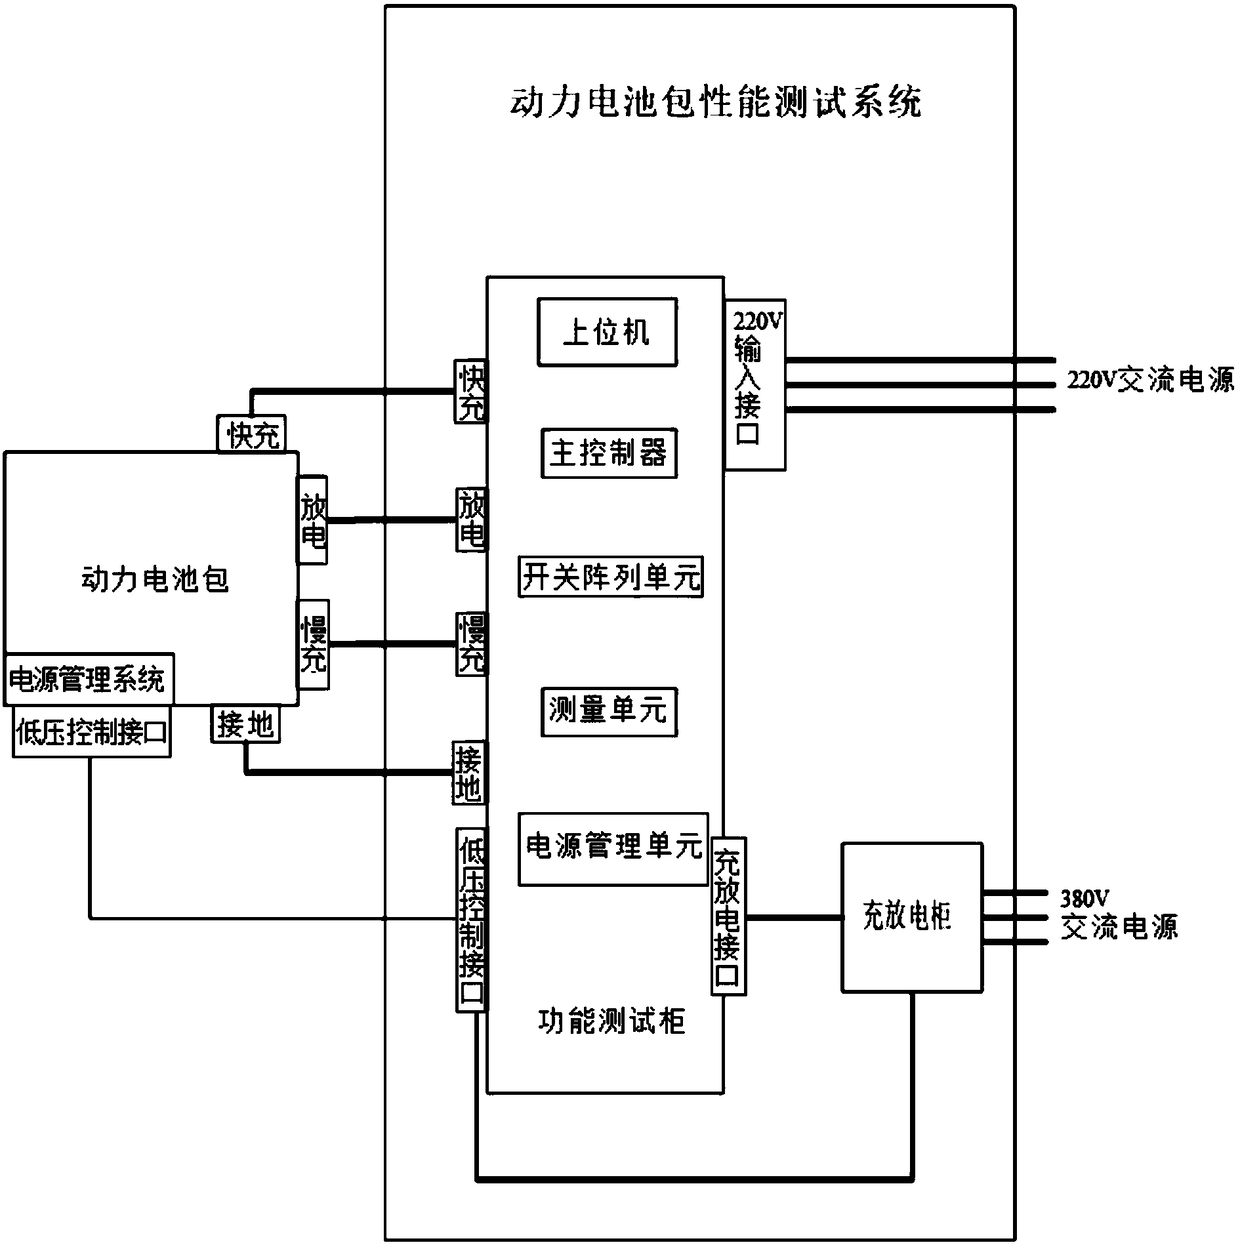 Automatic system and method for testing performance of power battery pack of electric automobile